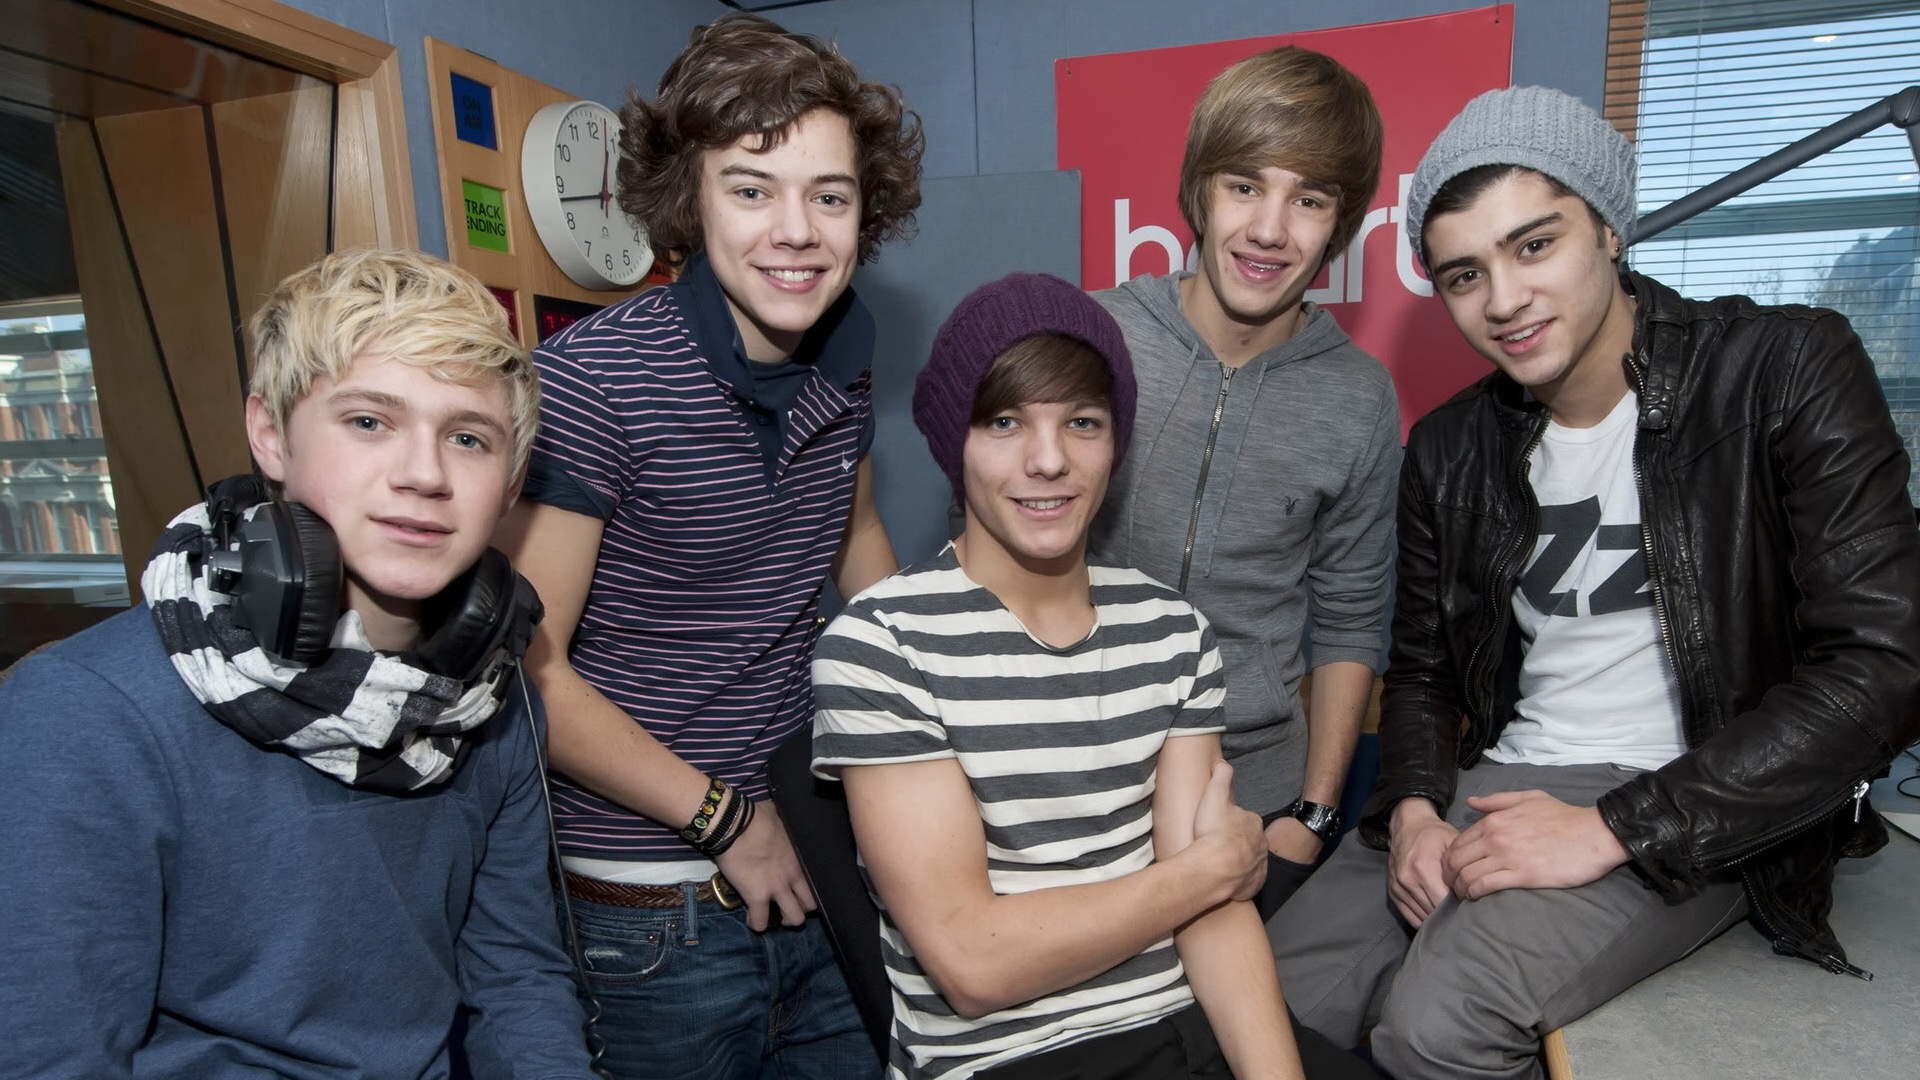 One Direction (Band): The group named the Global Recording Artist of the Year, 1D. 1920x1080 Full HD Wallpaper.